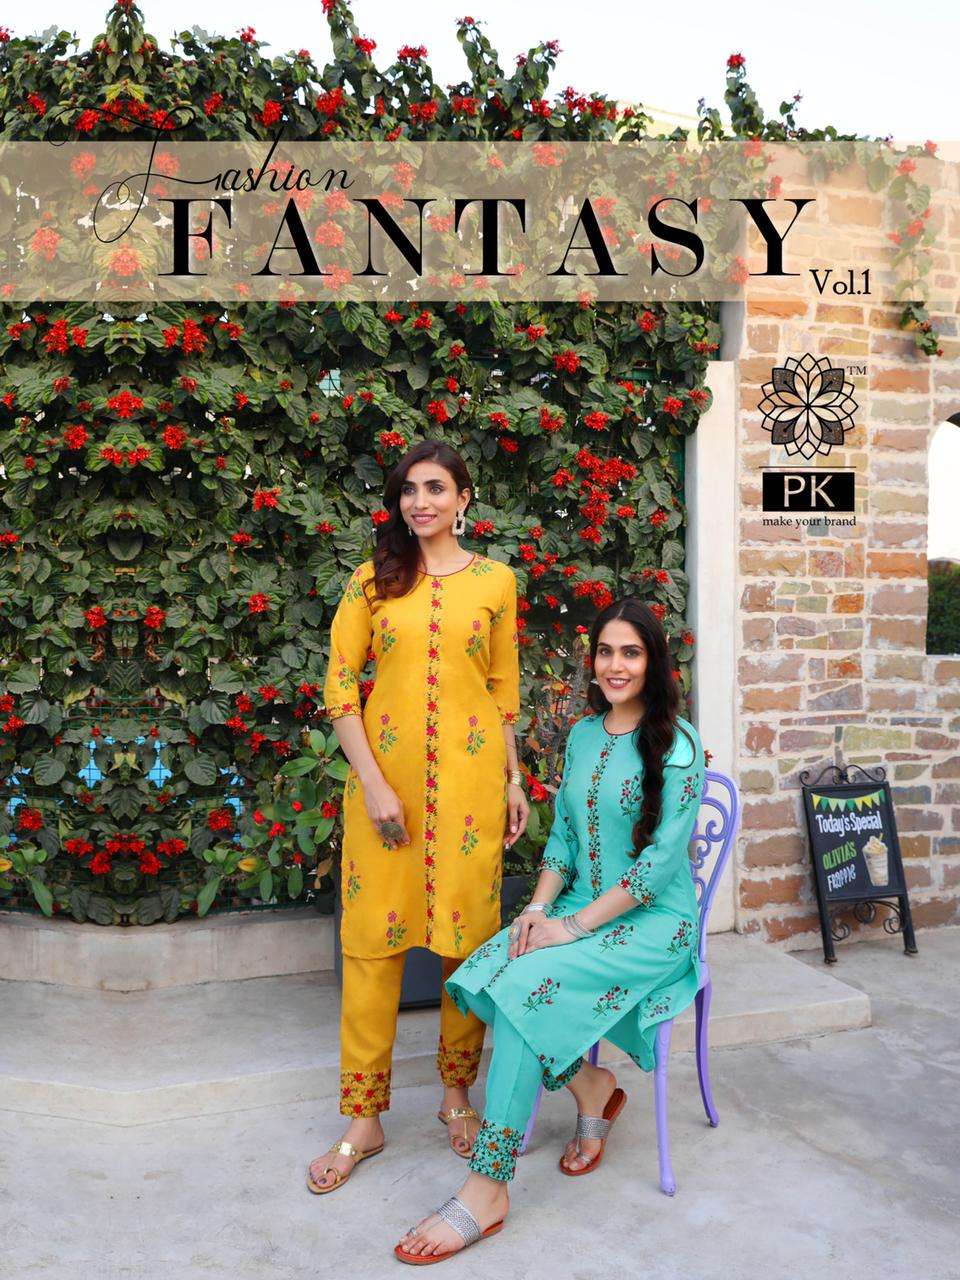 FASHION FANTASY VOL-1 BY PK 1001 TO 1005 SERIES BEAUTIFUL STYLISH FANCY COLORFUL CASUAL WEAR & ETHNIC WEAR HEAVY COTTON PRINT WITH WORK KURTIS WITH BOTTOM AT WHOLESALE PRICE